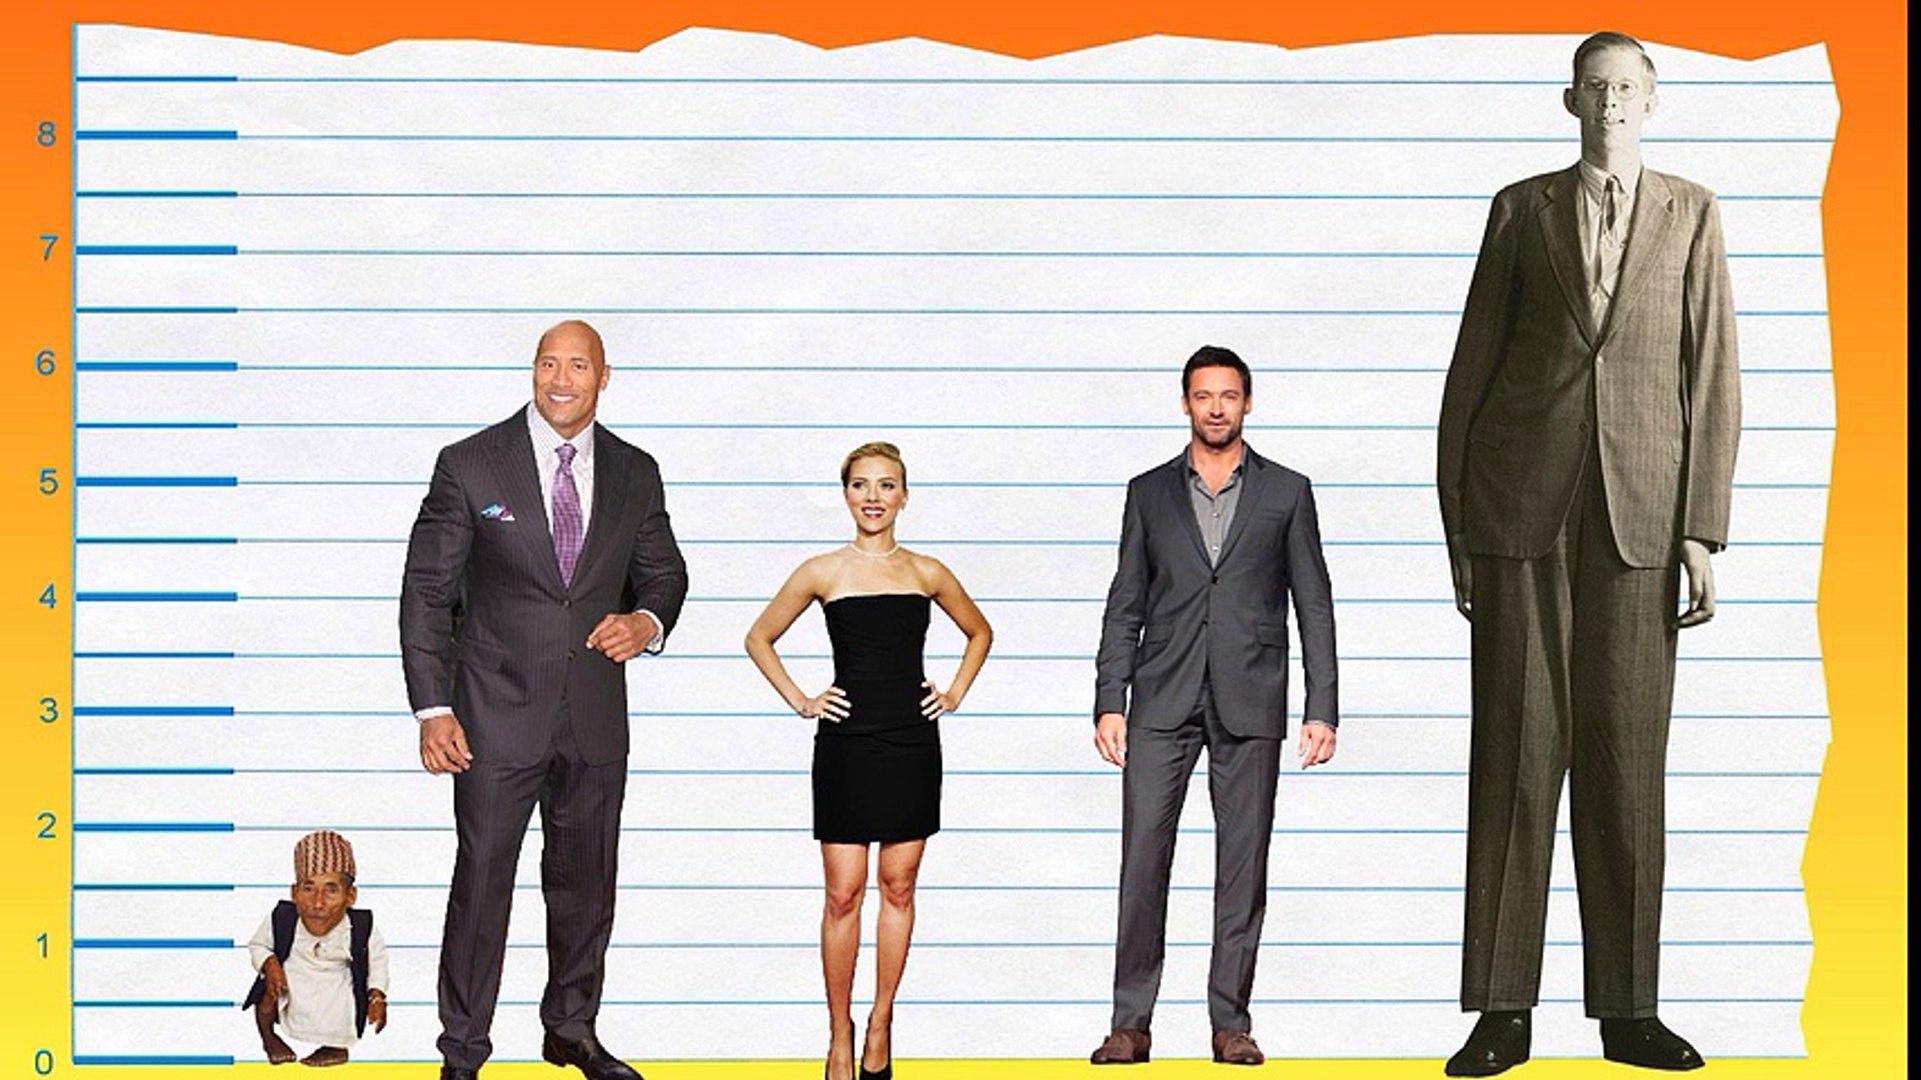 The Rock's Height Debate: How Tall Is Dwayne Johnson Really?